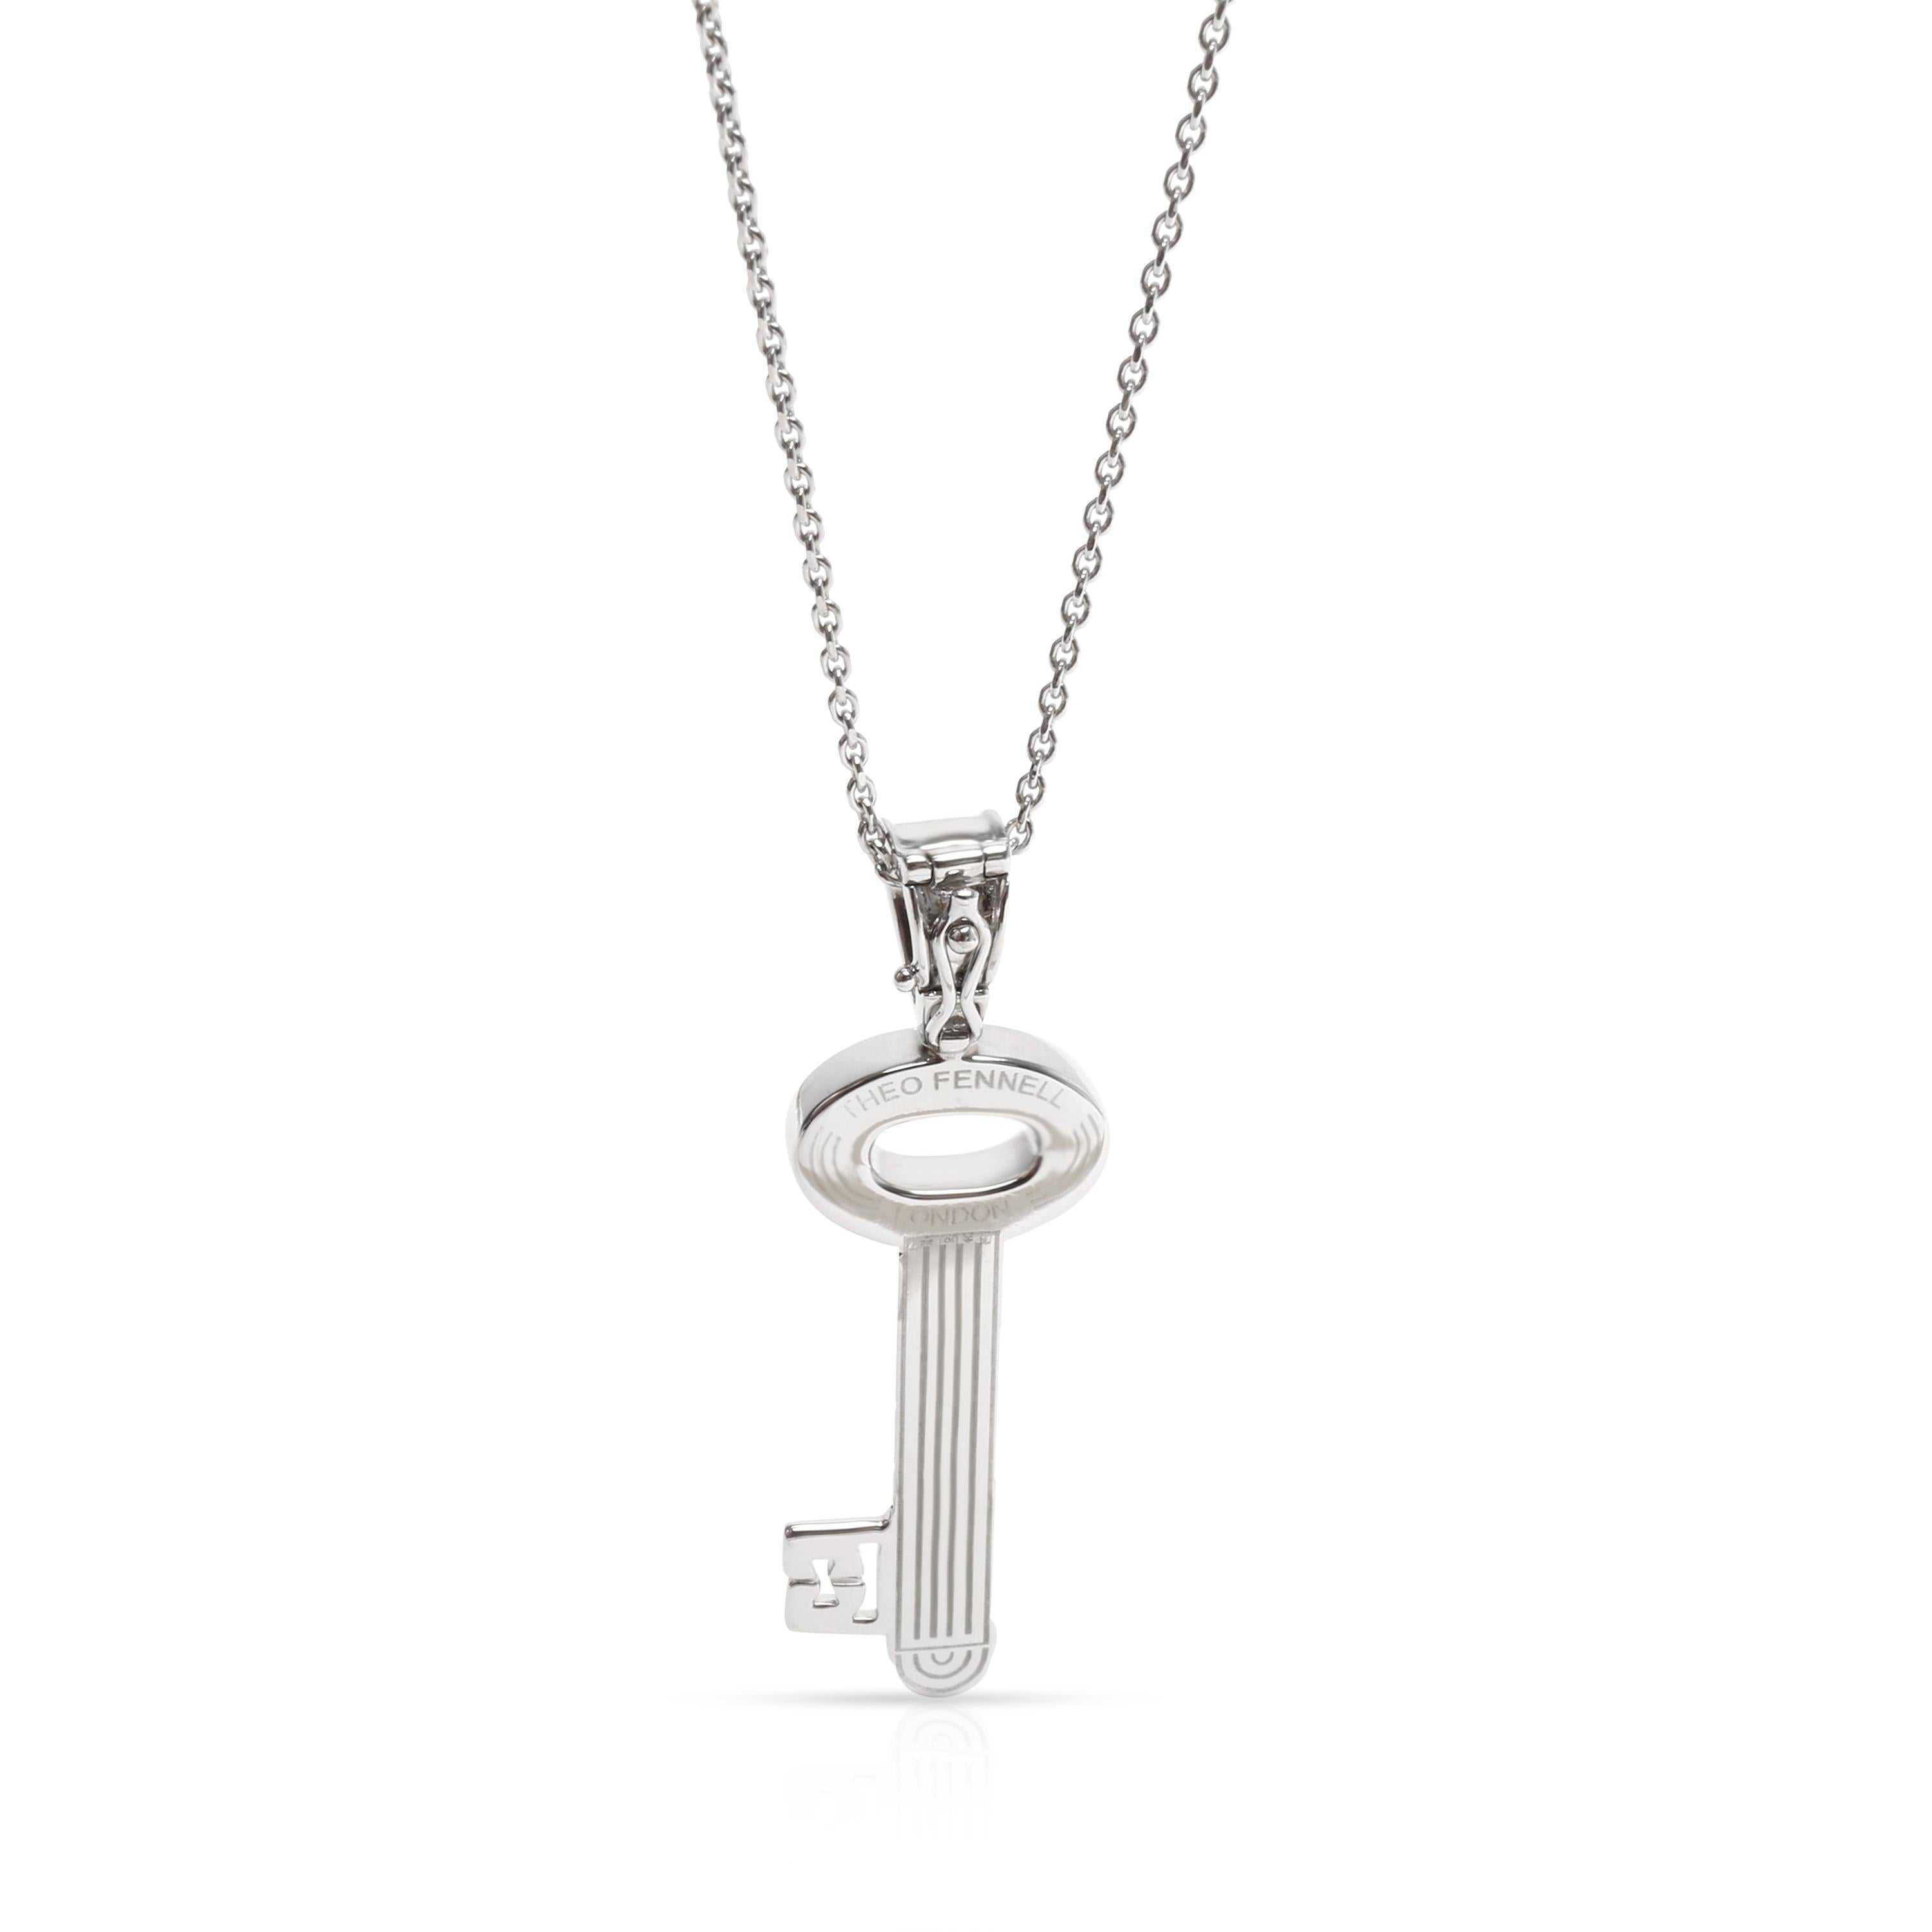 Theo Fennell Baby Key Diamond Necklace in 18K Gold (0.75 CTW)

PRIMARY DETAILS
SKU: 102864
Listing Title: Theo Fennell Baby Key Diamond Necklace in 18K Gold (0.75 CTW)
Condition Description: Retail price 2,900 USD. In excellent condition and